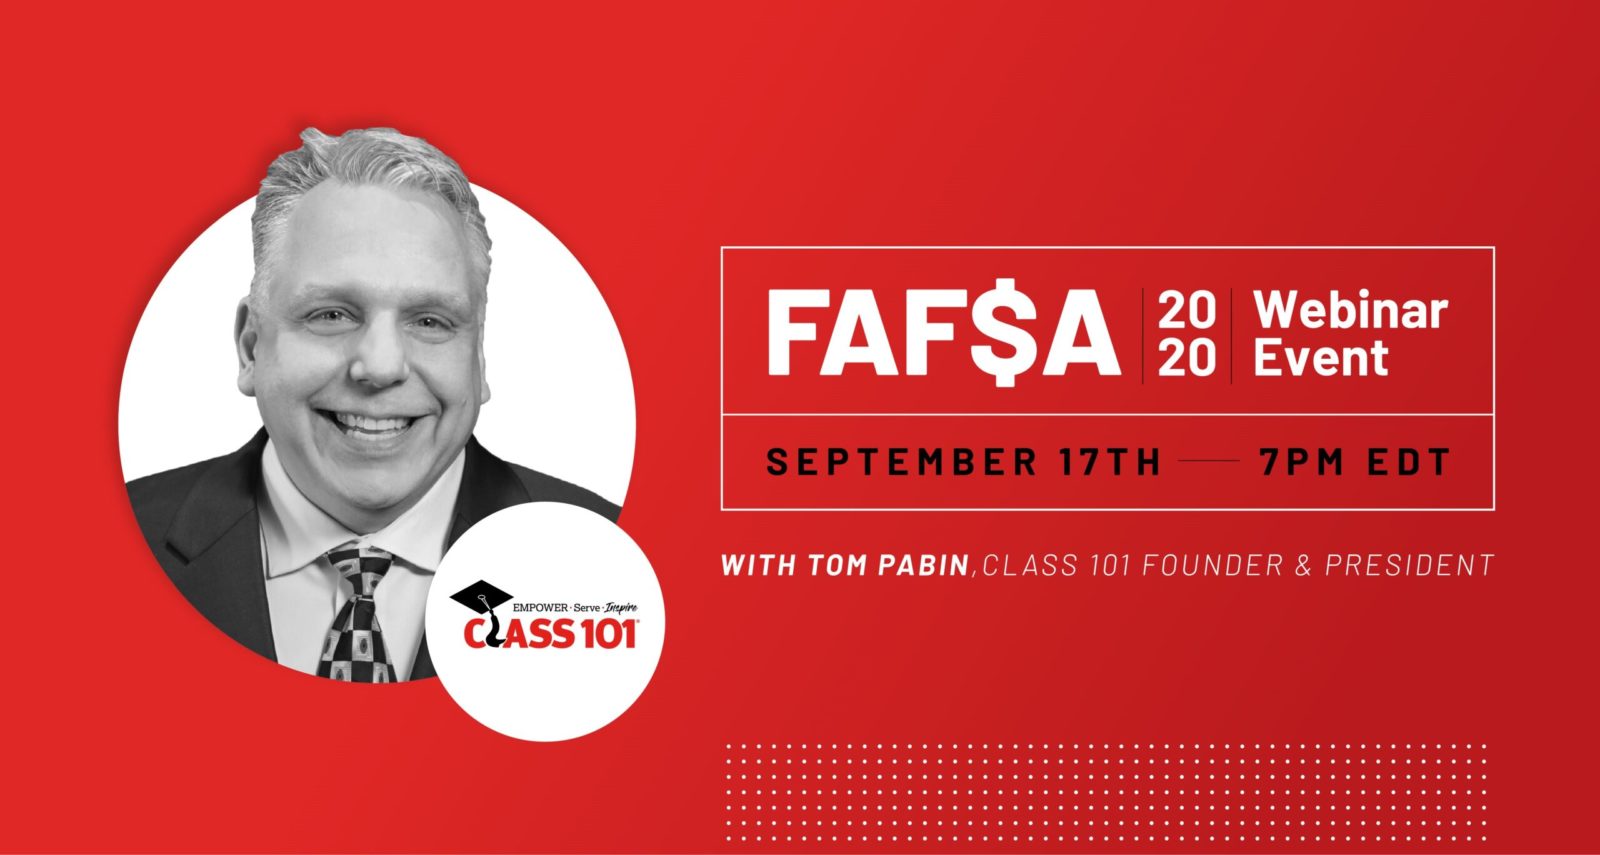 FAFSA Season Opens On October 1: Are You Ready?